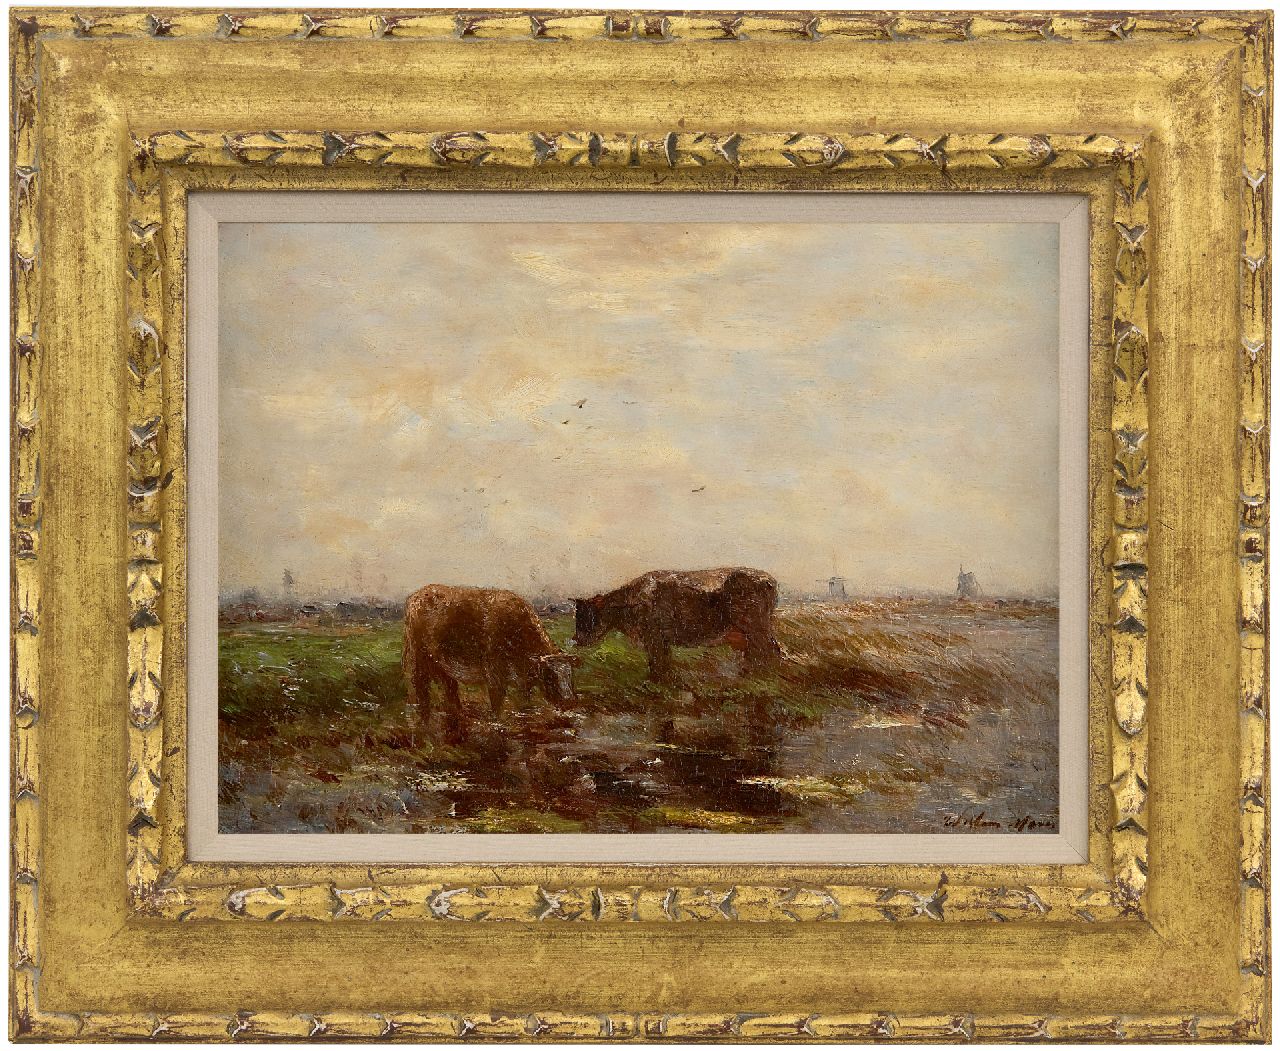 Maris W.  | Willem Maris, Two grazing cows in a polder landscape, oil on panel 24.1 x 32.6 cm, signed l.r.